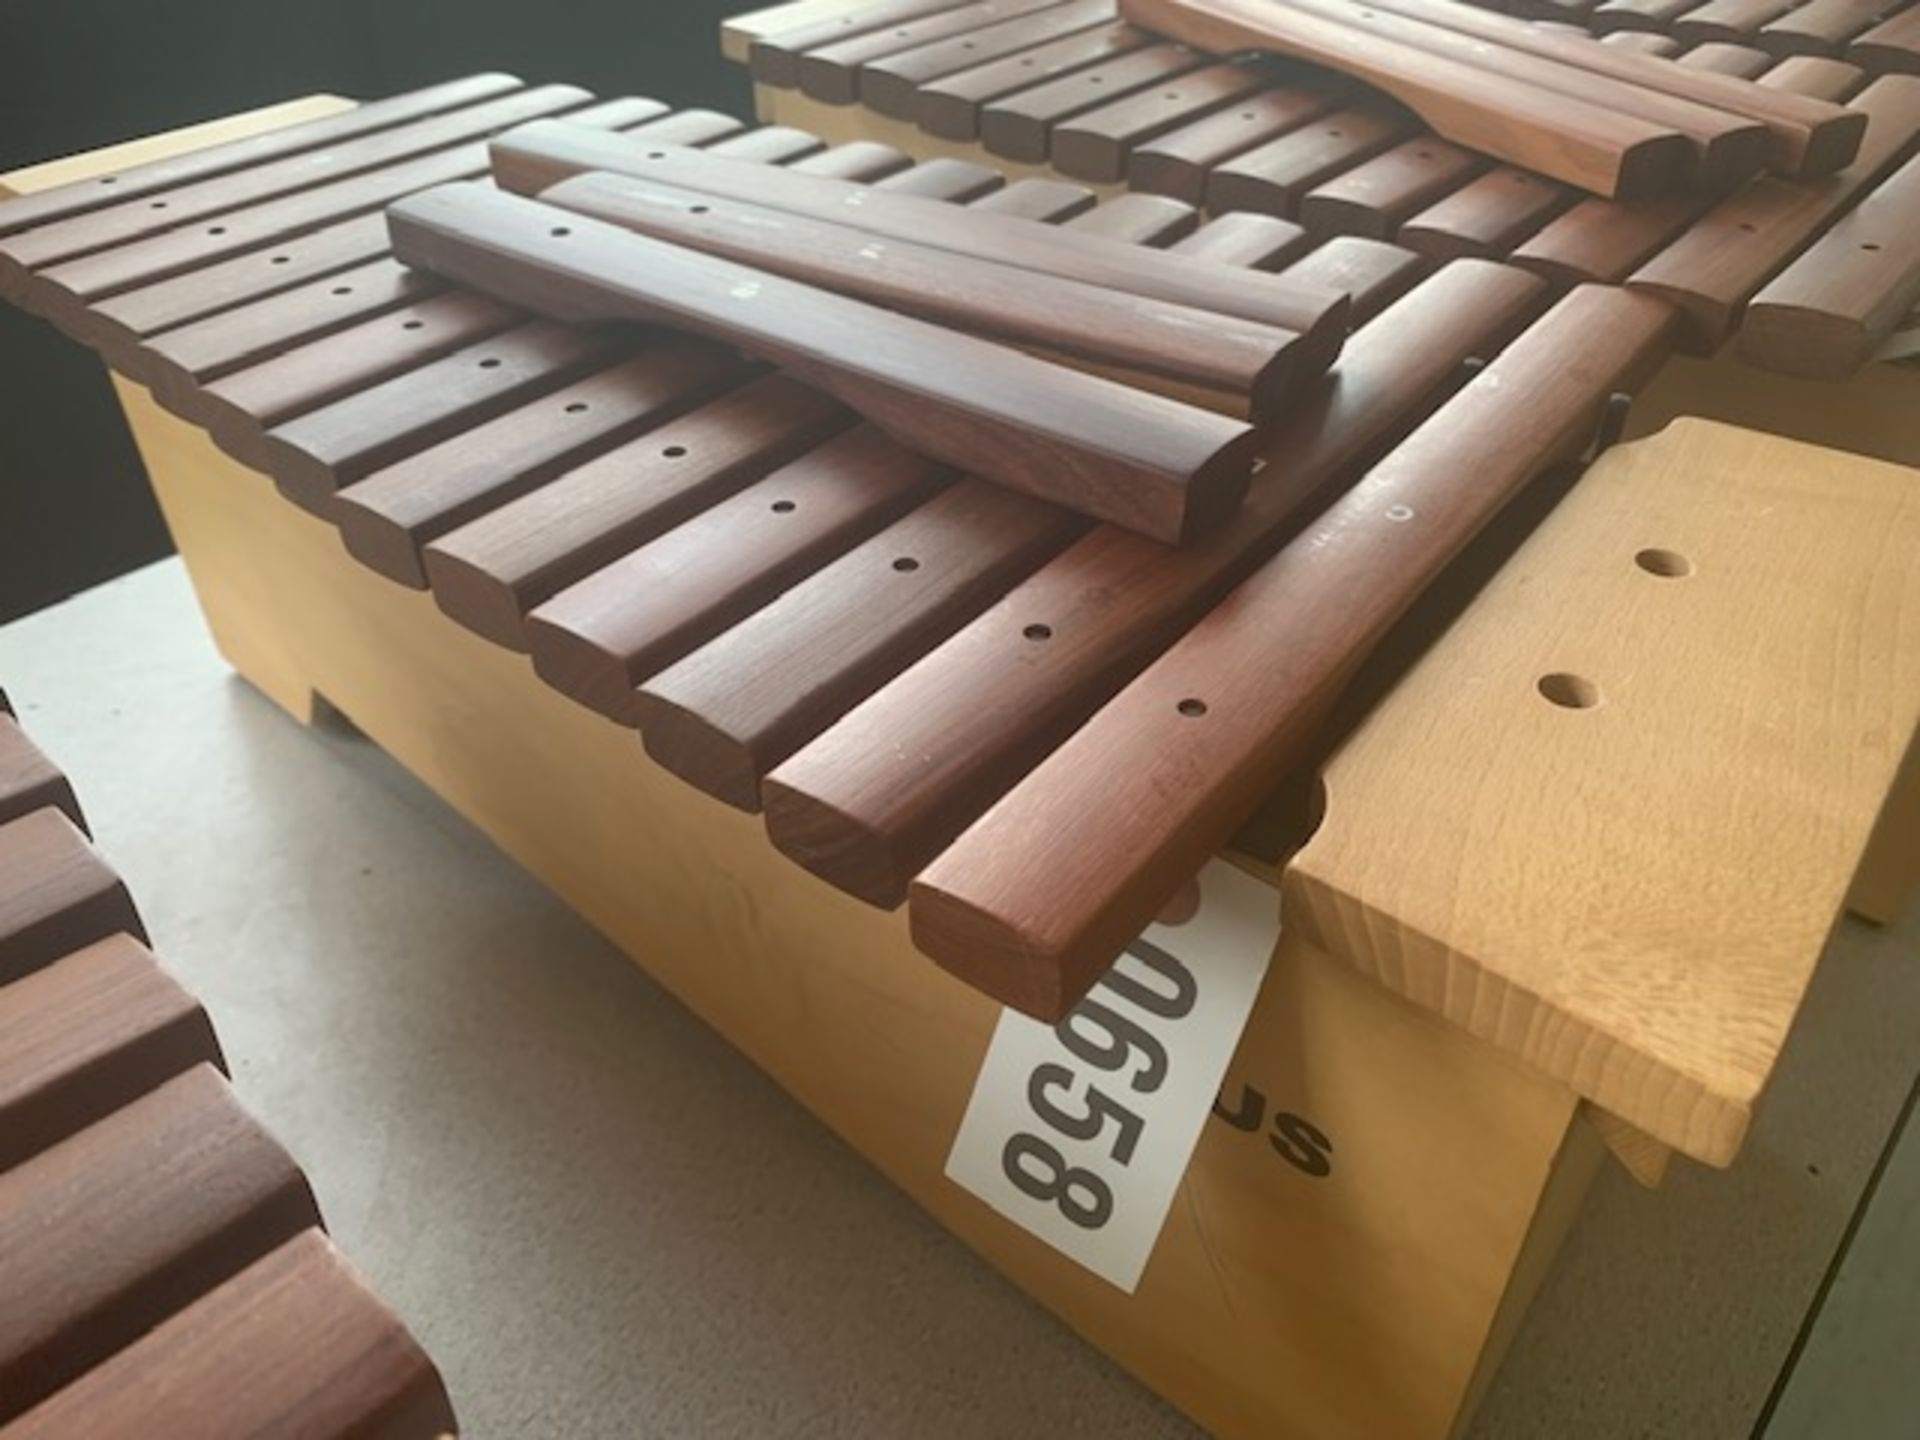 Emus Xylophone, Wood Base, Approx 10"Wx20"Lx12"H, w/Wood Bars, Used, Sold as shown in Photo